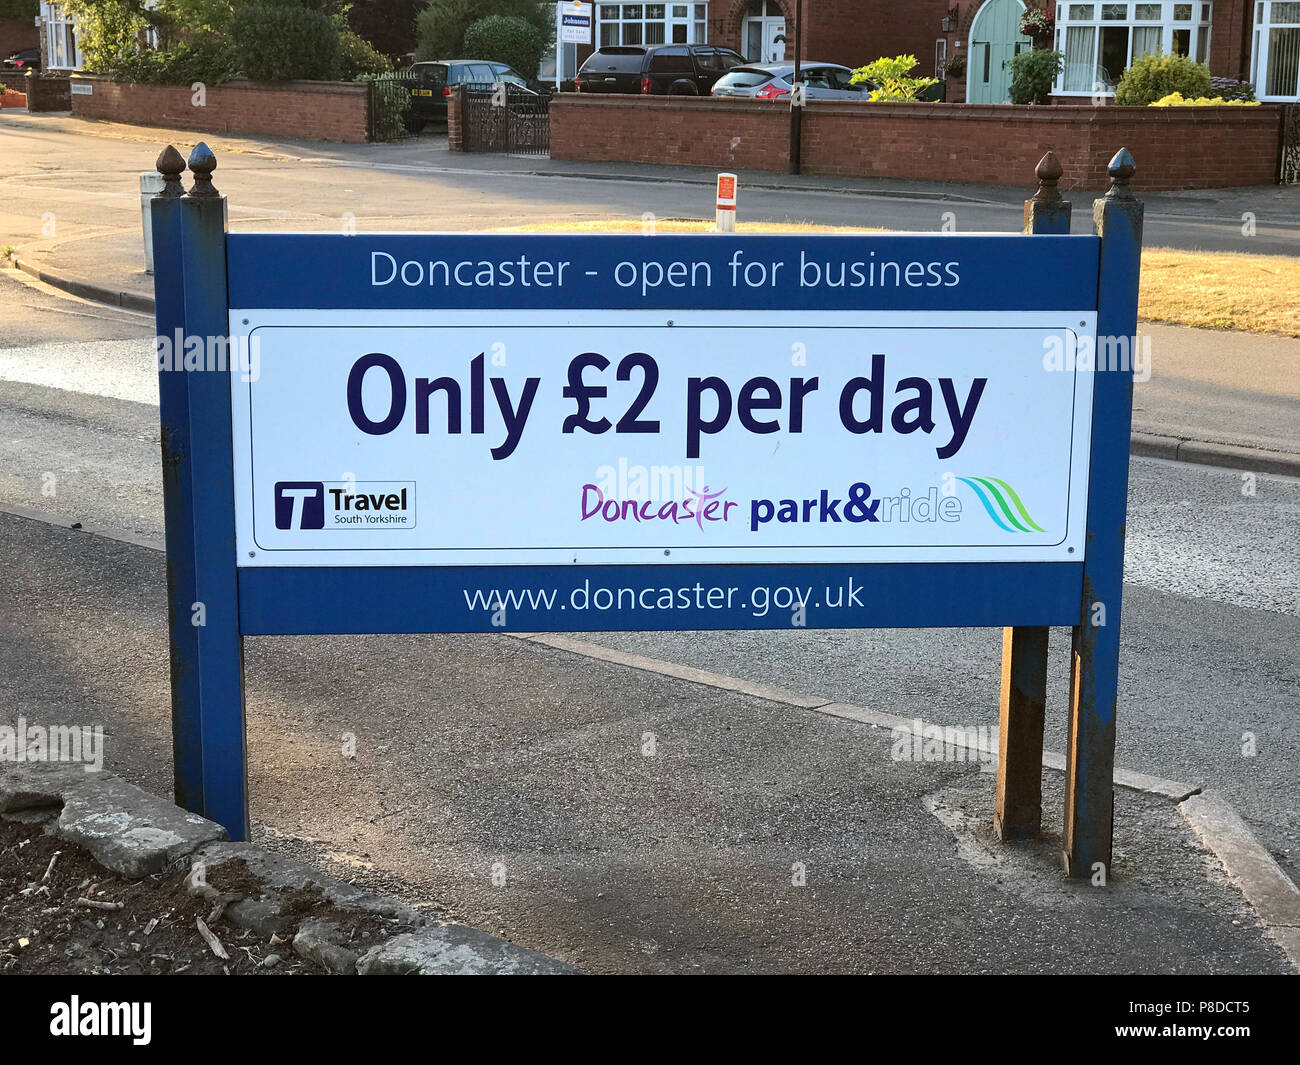 Doncaster, Open For Business, Only £2 per day, Town centre parking, sign, Doncaster, Yorkshire, England, UK Stock Photo